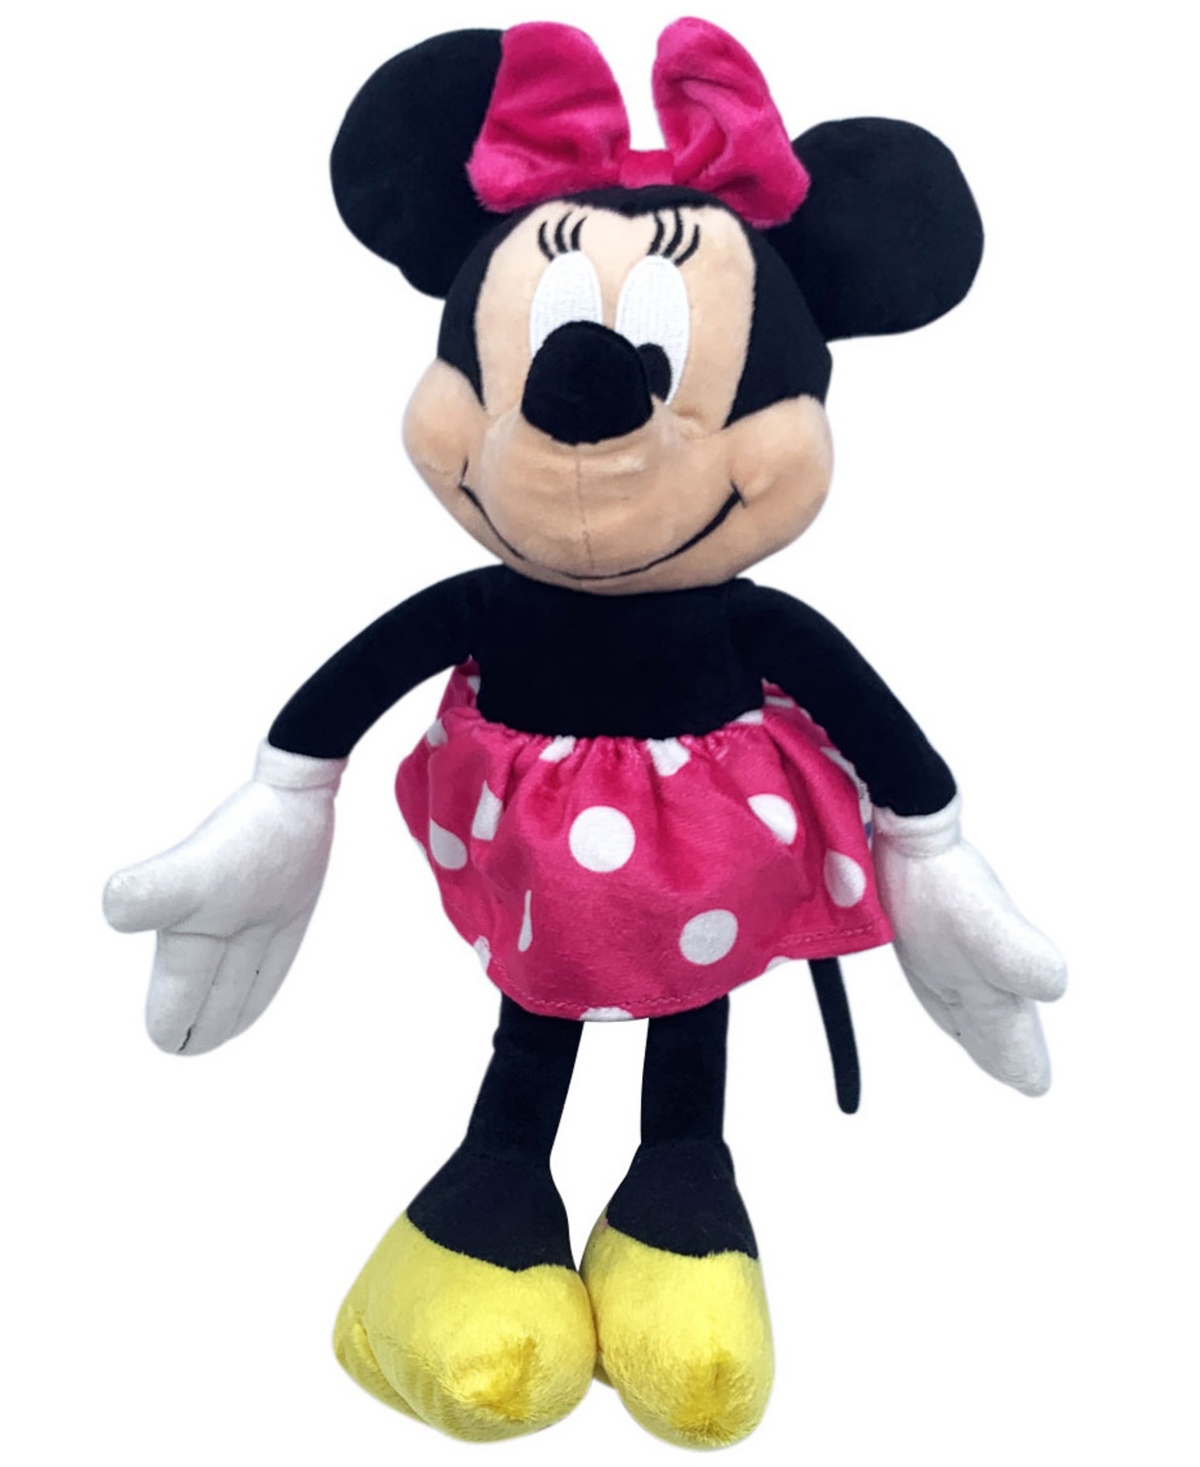 Shop Disney Minnie Mouse 3-pc. Travel Throw, Pillow, & Pillow Buddy Set In Red